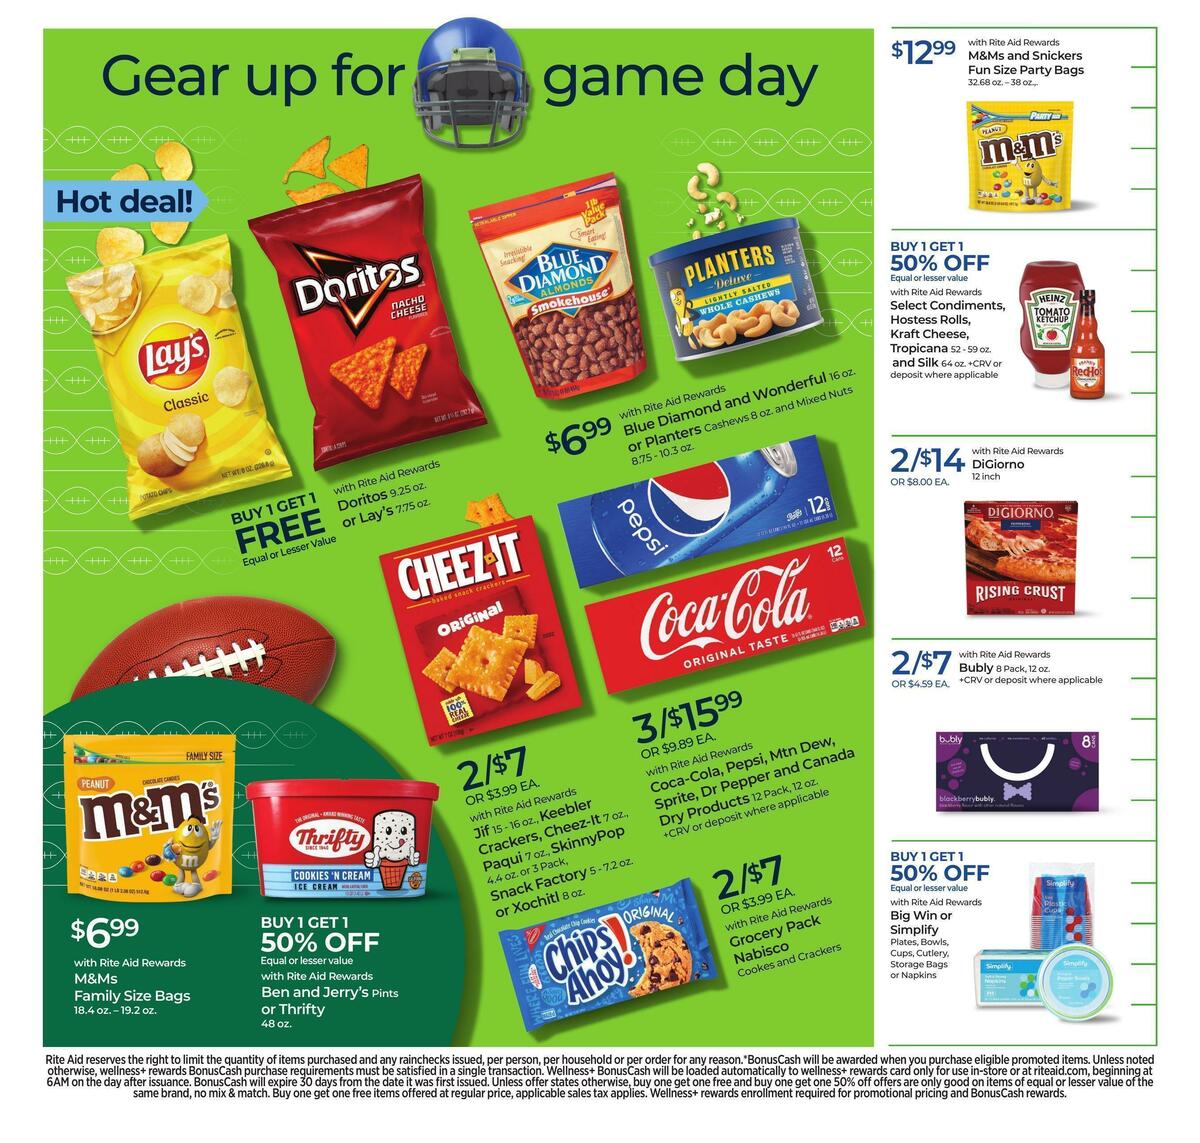 Rite Aid Weekly Ad from February 5